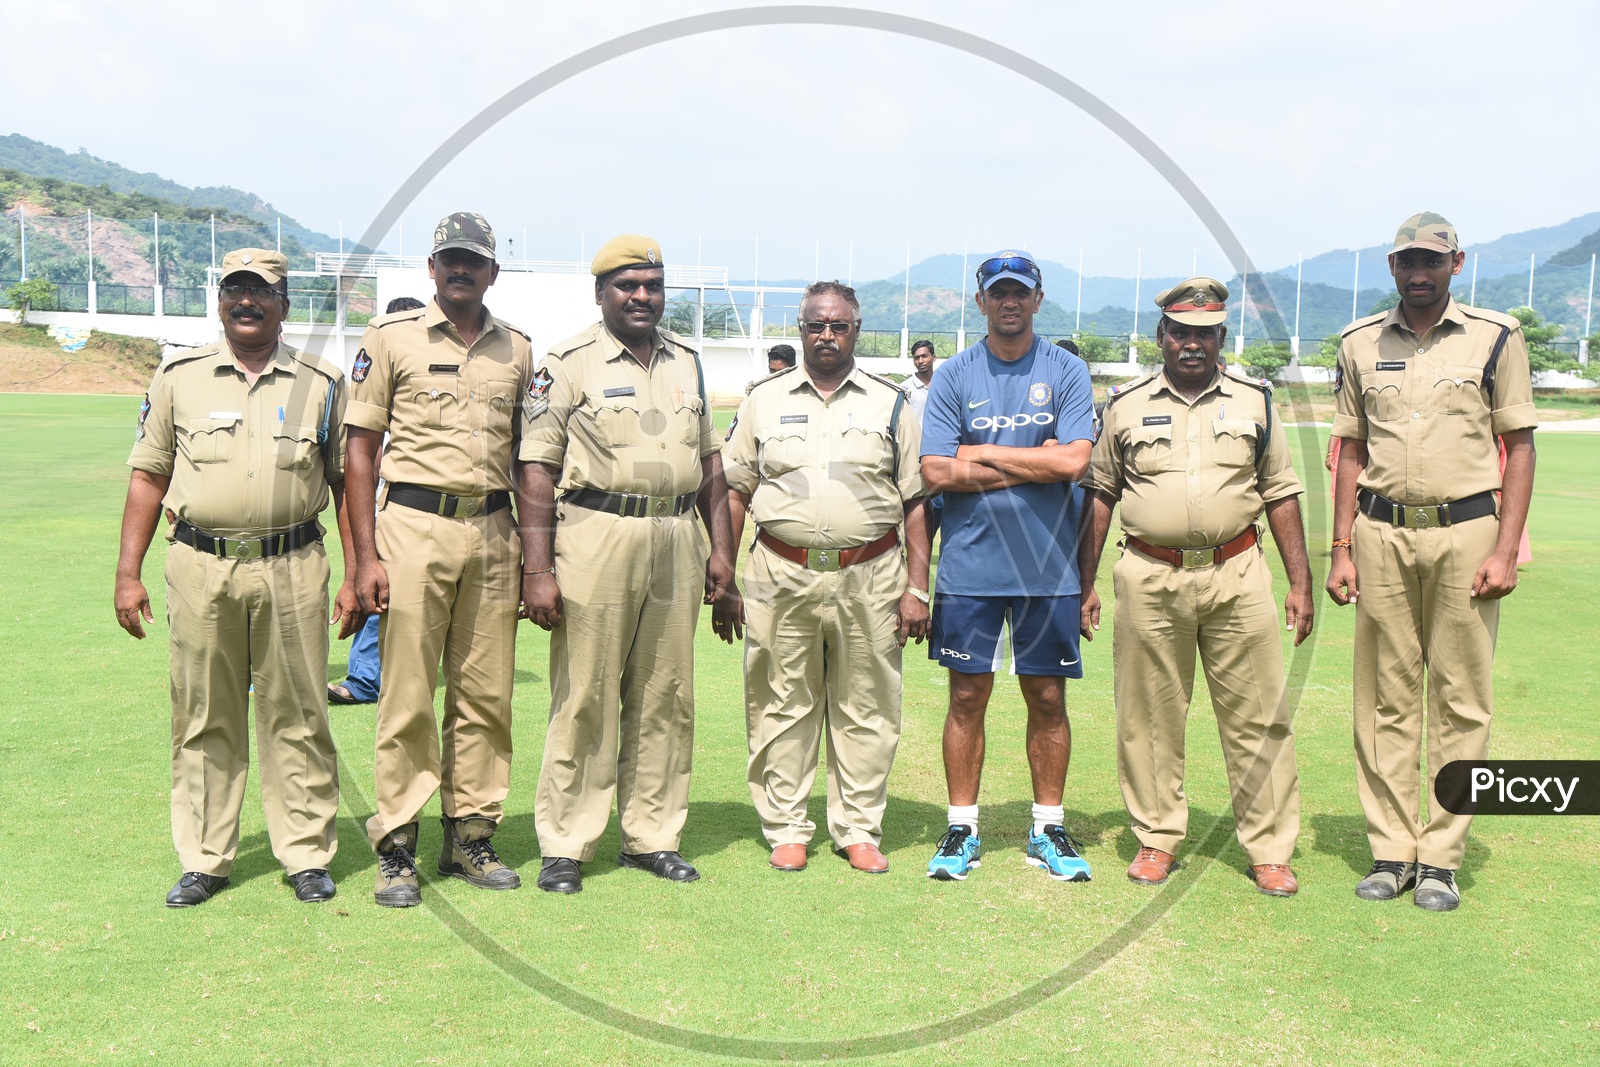 Rahul Dravid posing for a picture with policemen in the Cricket Ground